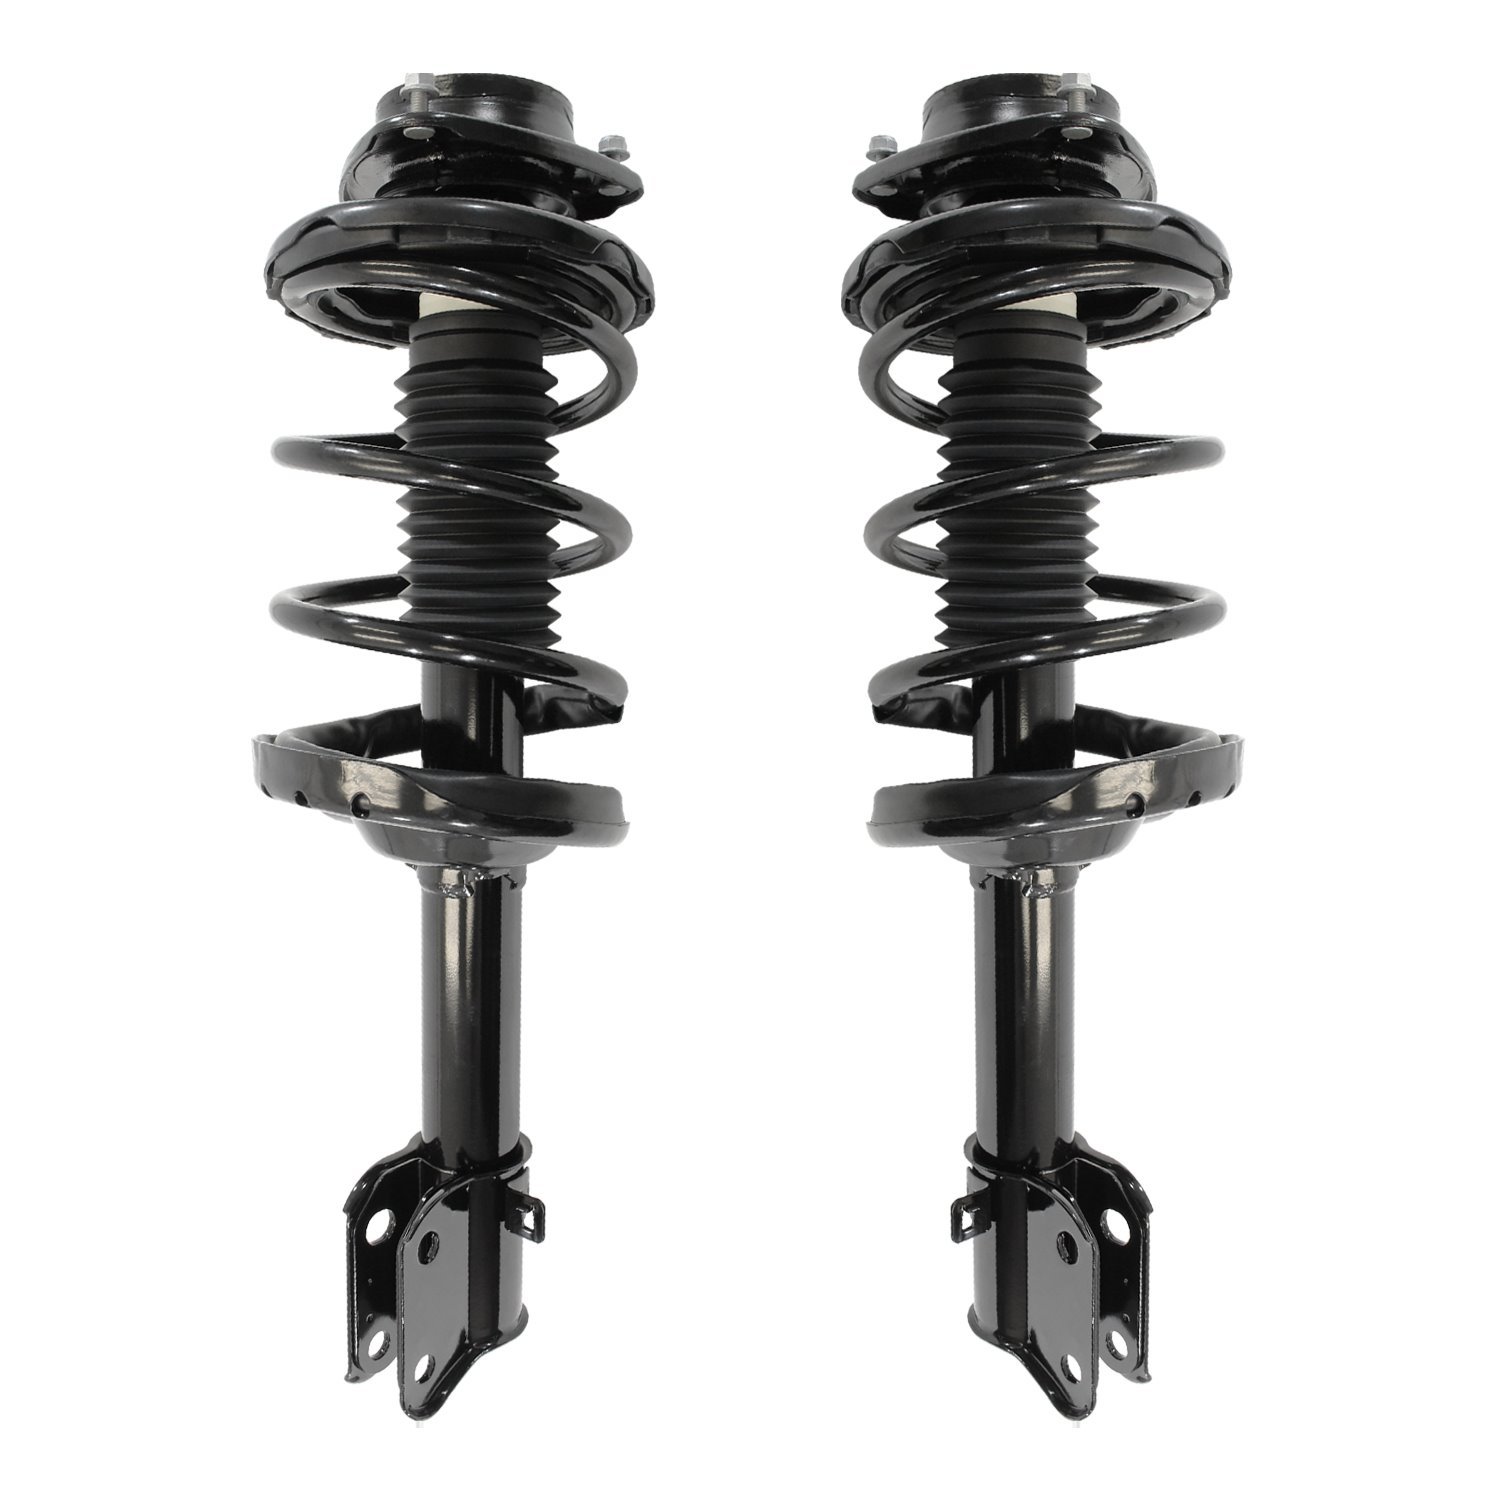 2-13361-13362-001 Front Suspension Strut & Coil Spring Assemby Set Fits Select Subaru Outback